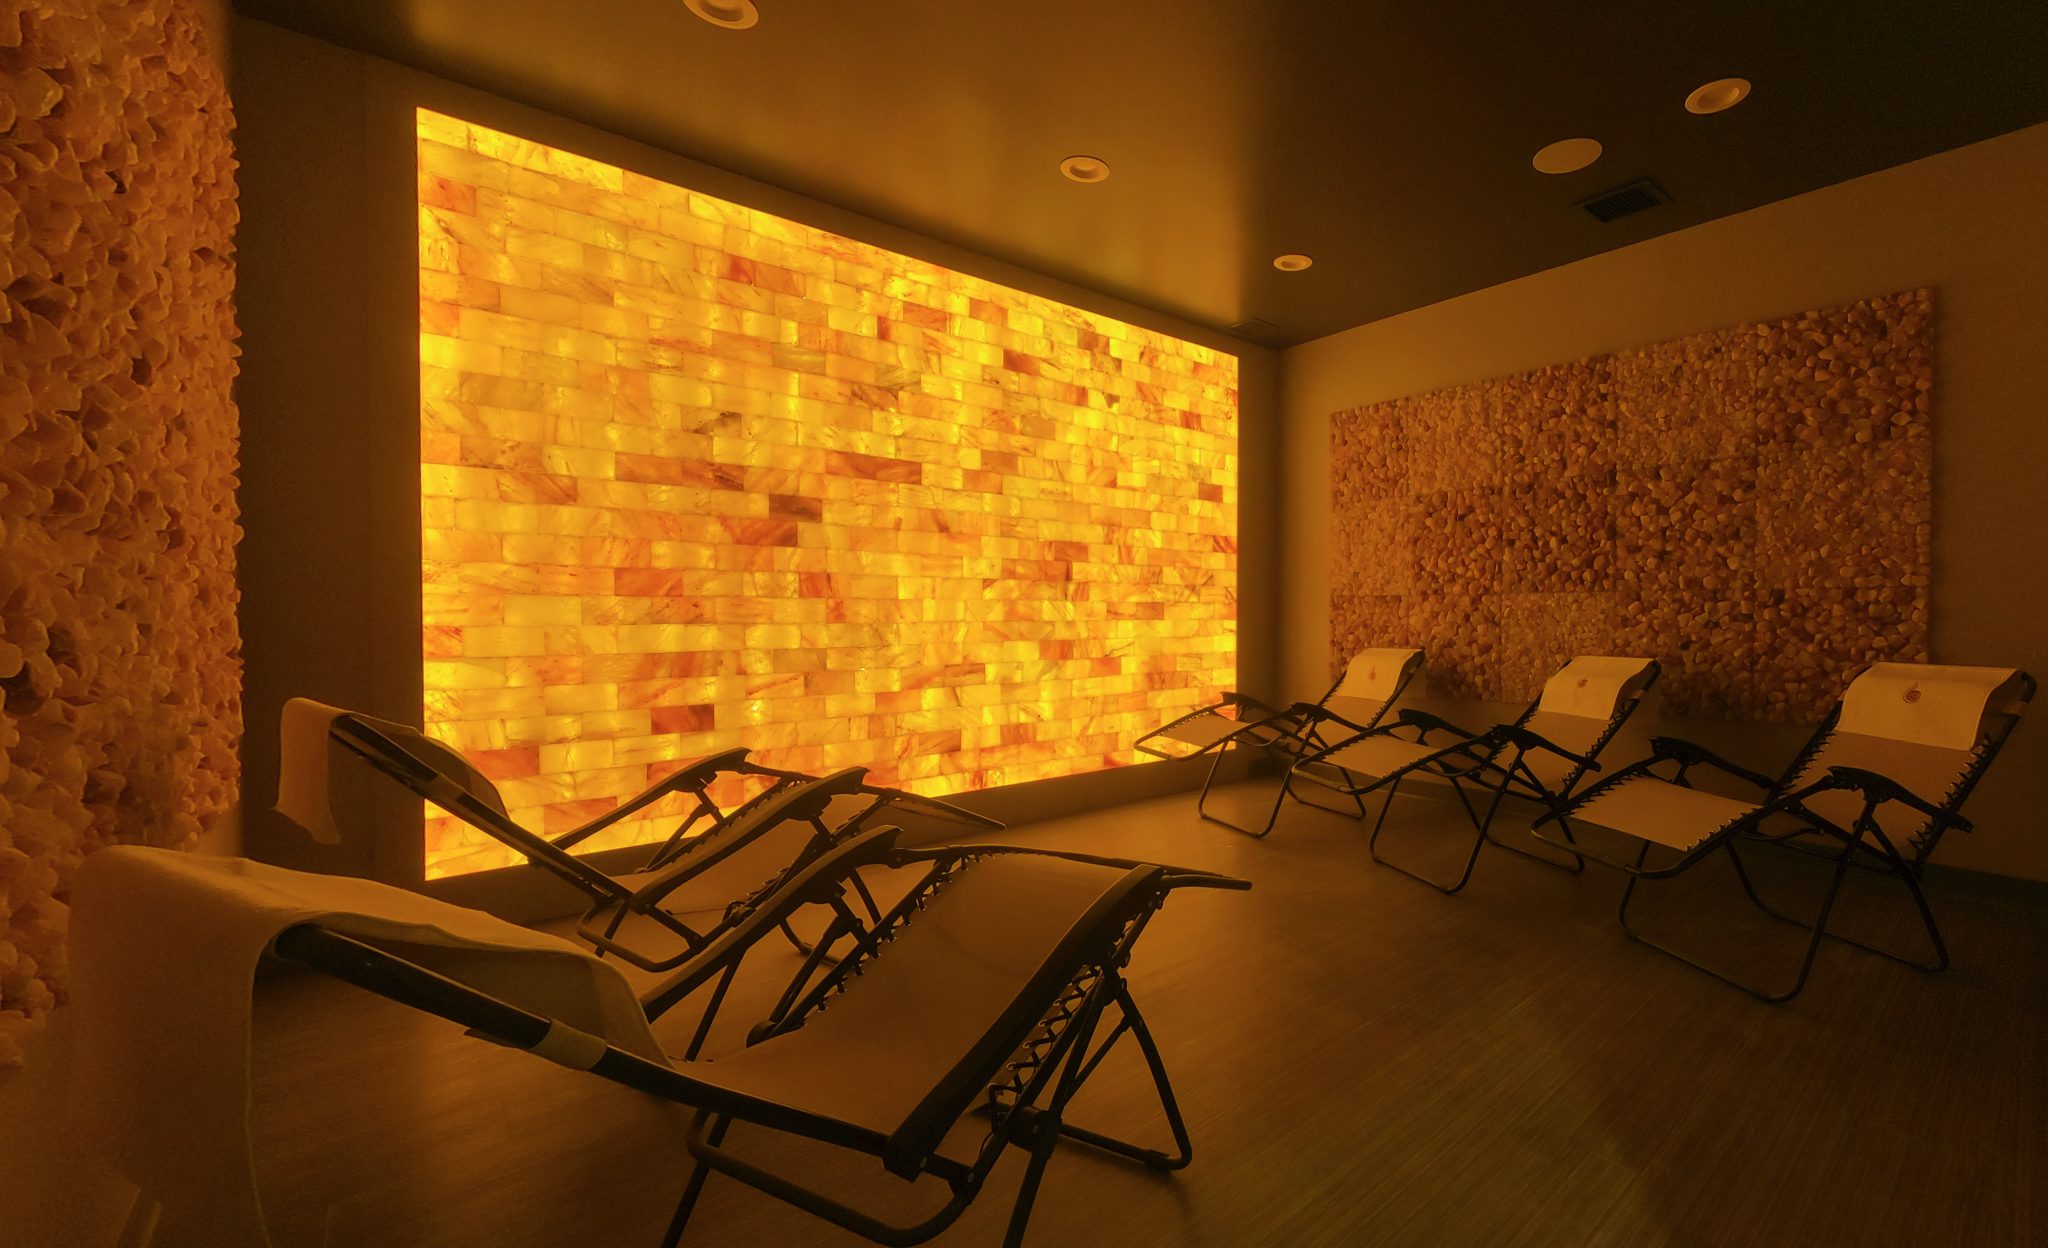 Five Reclining Chairs On A Wooden Floor In Front Of A Led Backlit Salt Panel Wall And Two Large Rectangular Salt Brick Wall Décor At The Breathe Salt Vault - Springfield, Missouri.